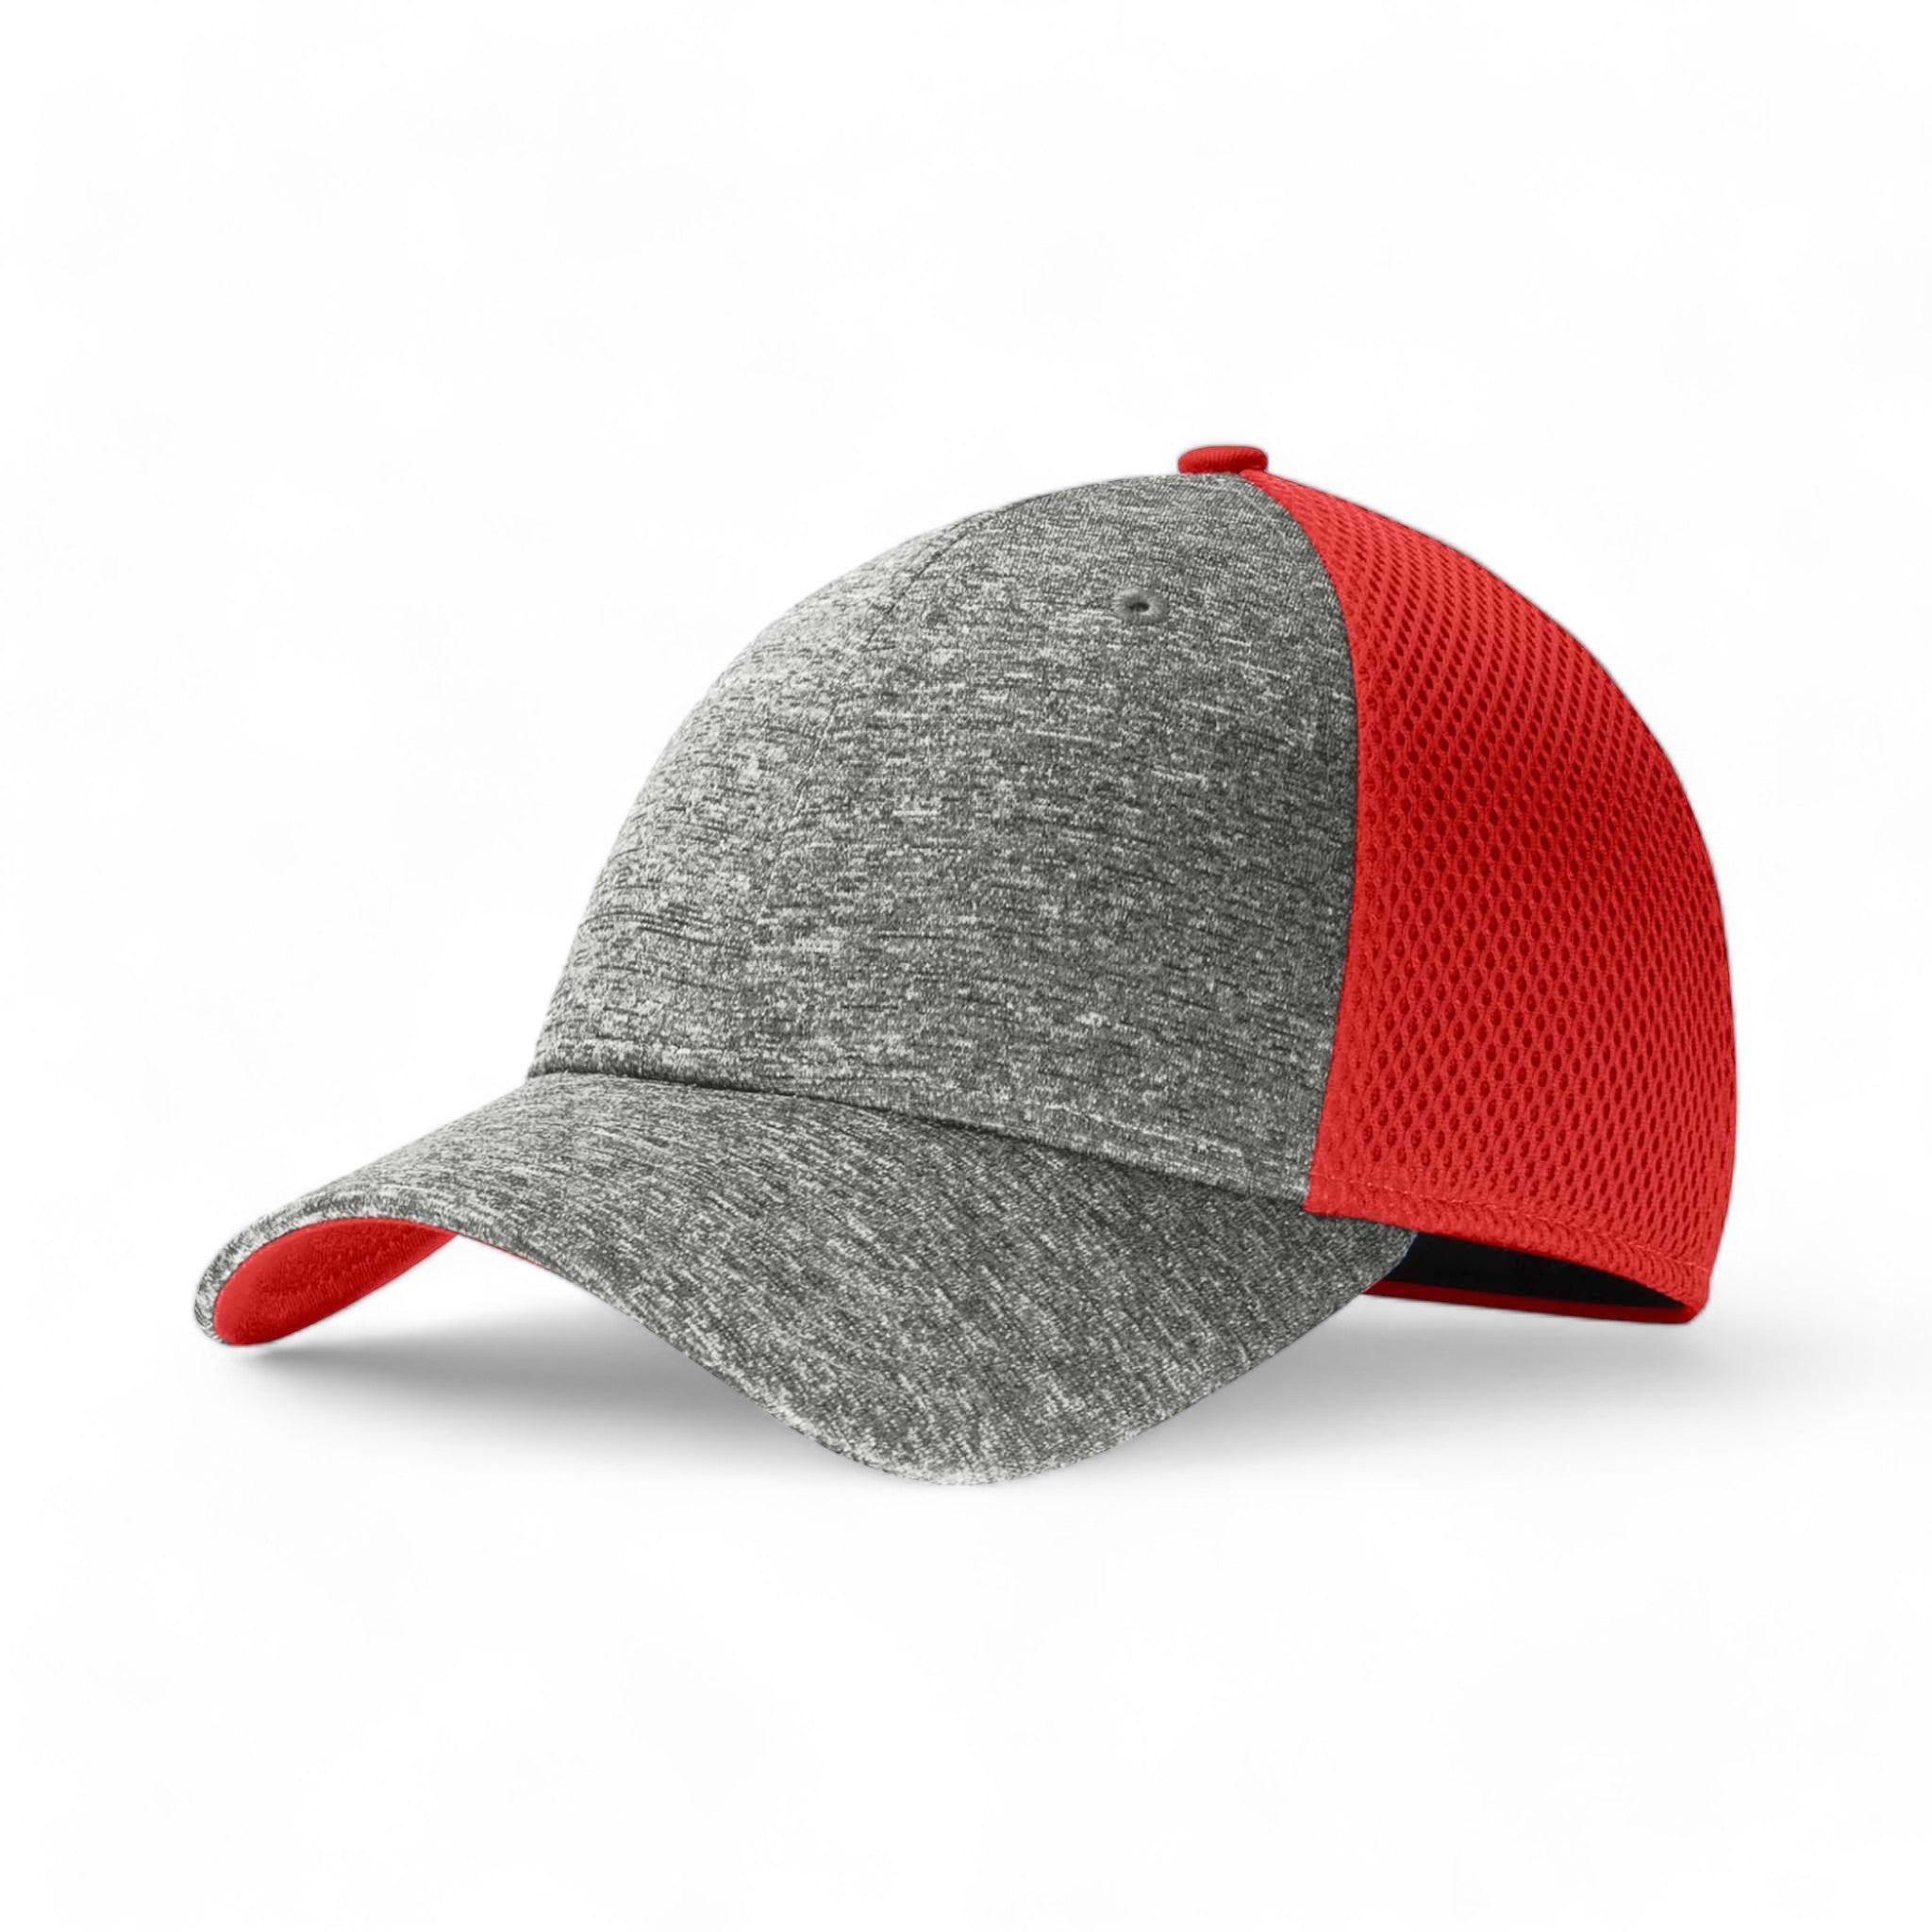 Side view of New Era NE702 custom hat in scarlet red and shadow heather